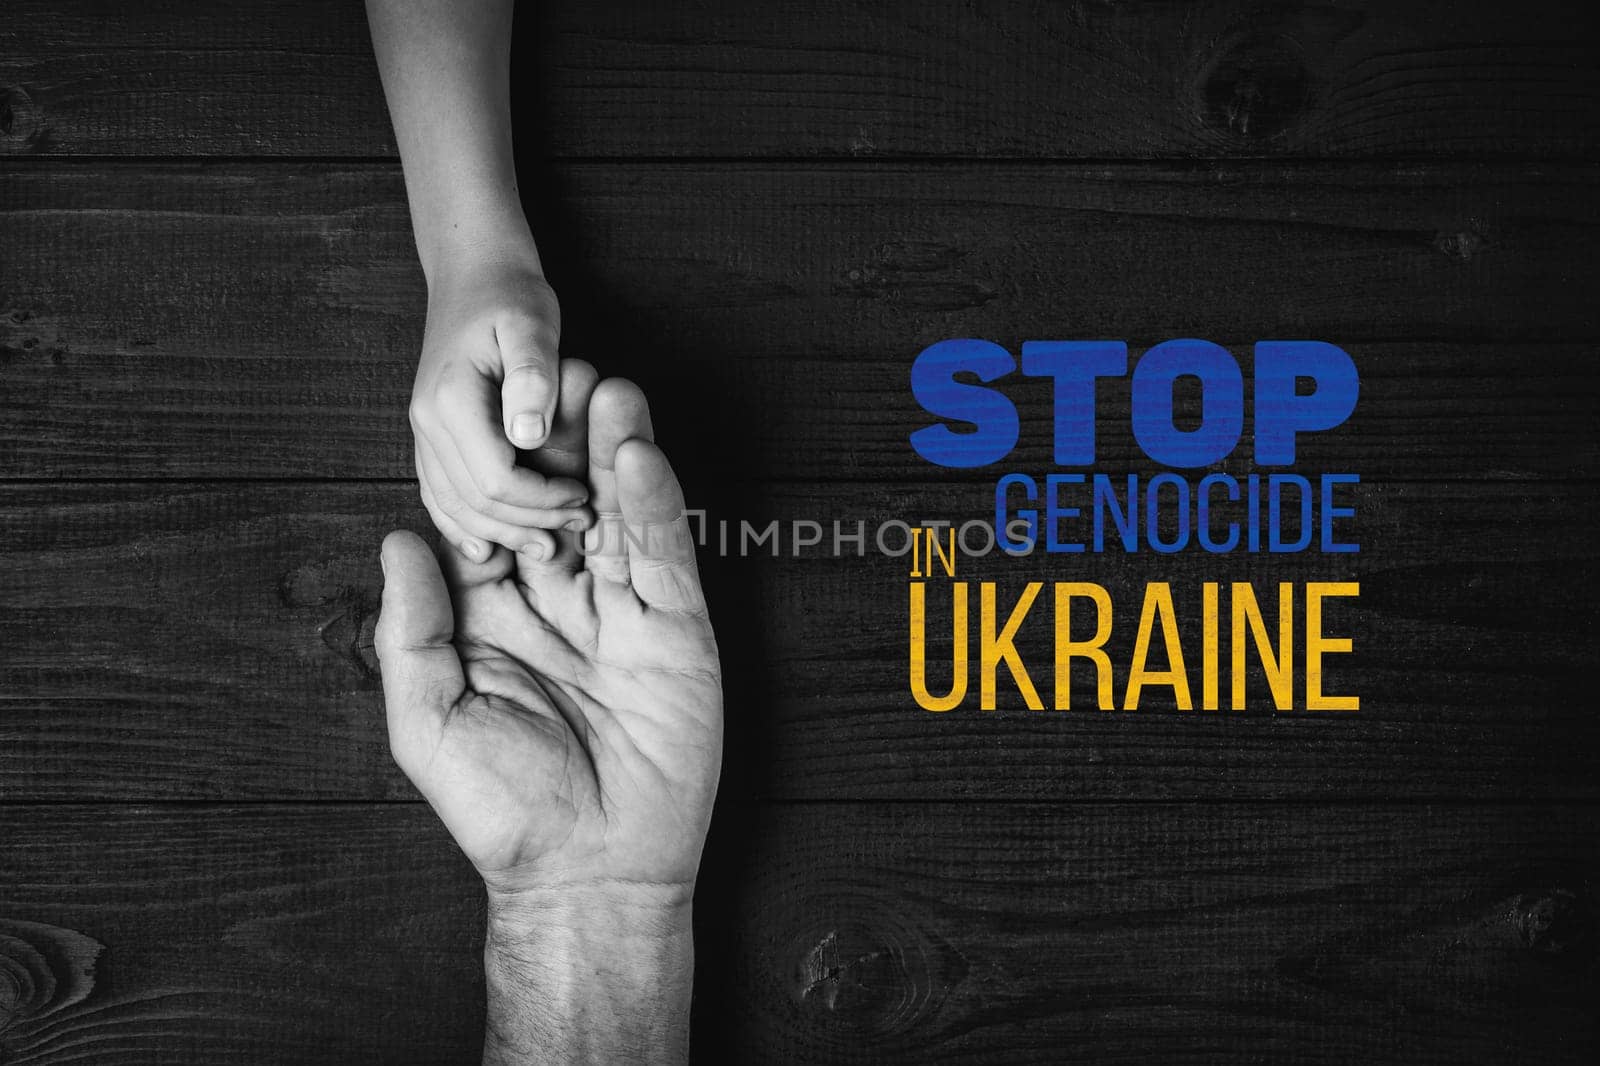 male hands hold childrens on a dark background with words stop genocide in ukraine black and white color. concept needs help and support, truth will win